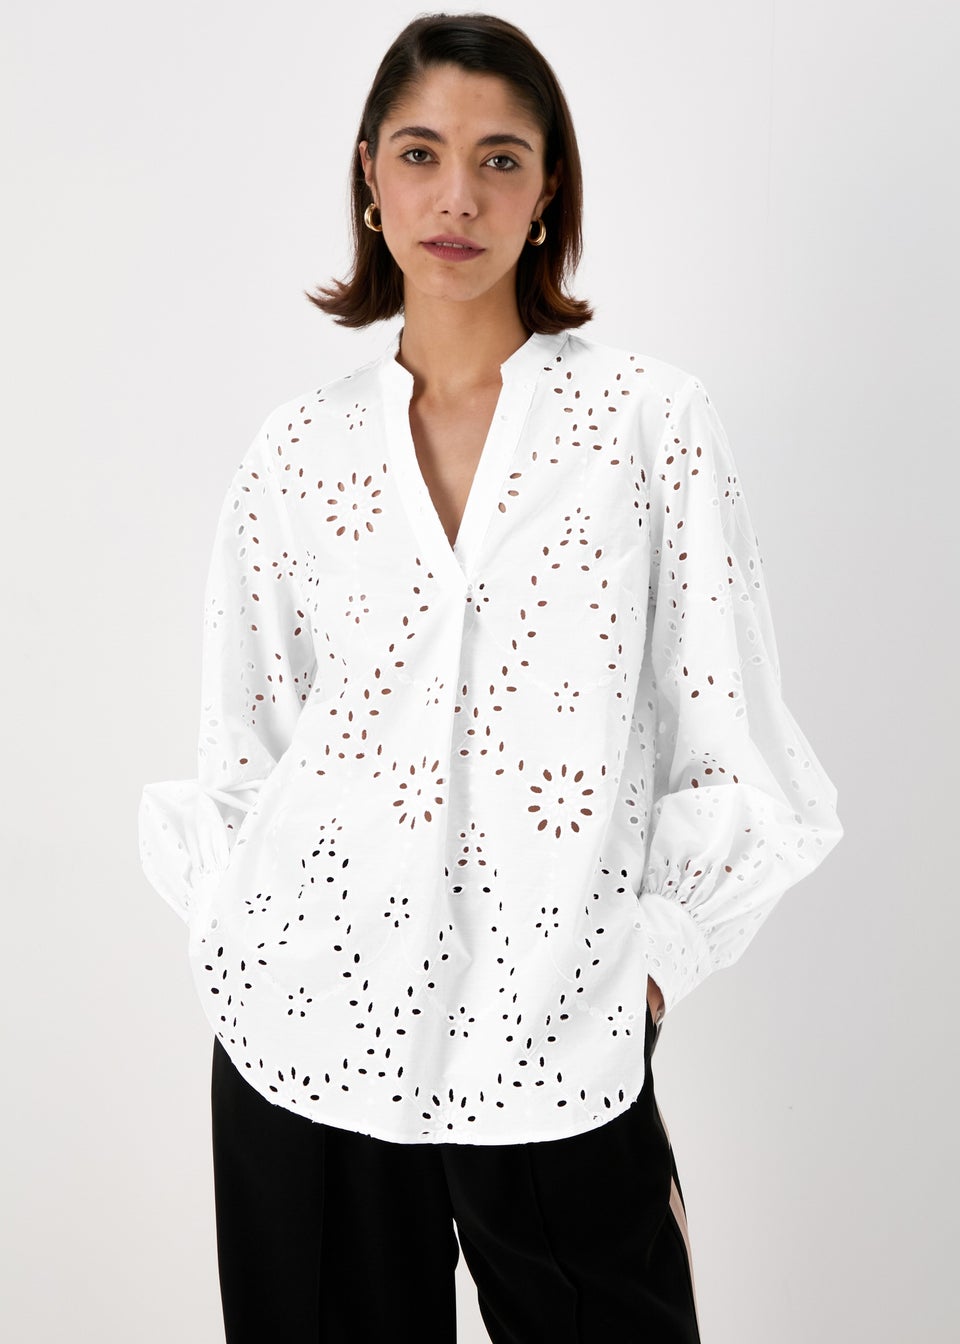 Womens Shirts & Blouses - White, Fitted & Floral - Matalan